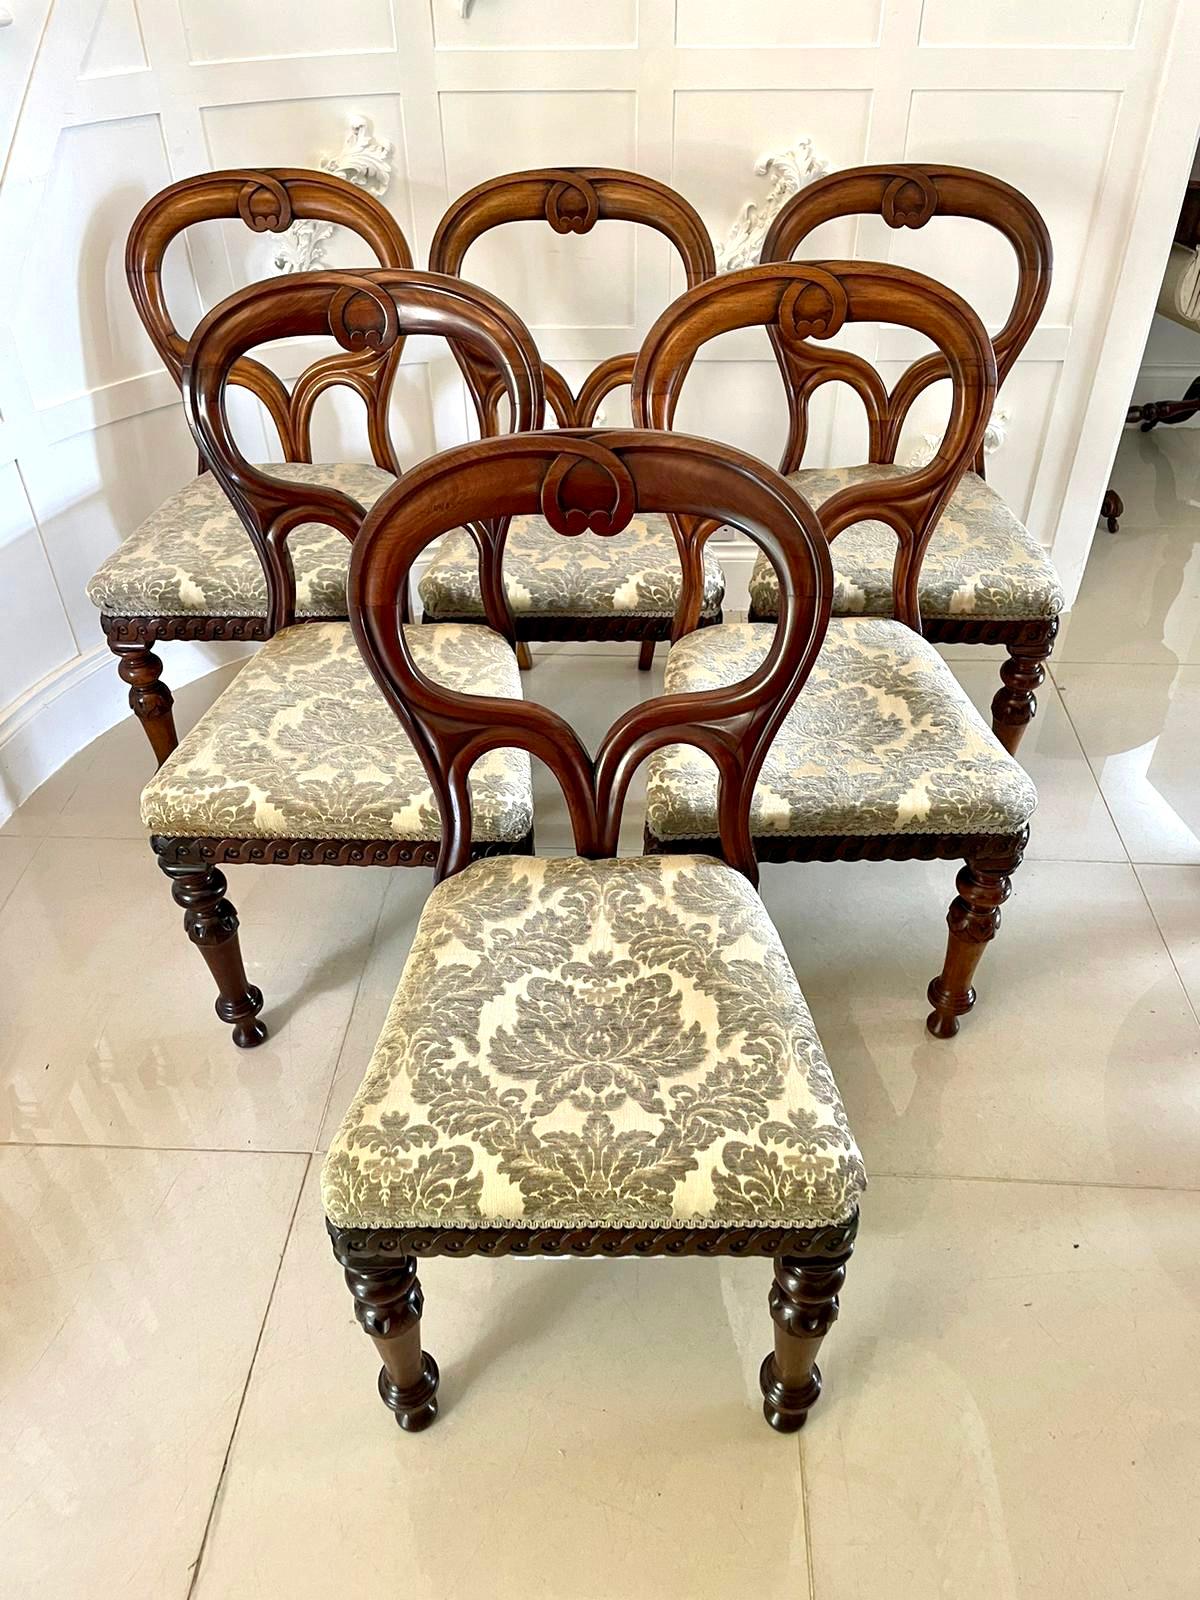 Outstanding set of 6 Victorian antique mahogany Scottish balloon back dining chairs having lovely unusual backs with shaped reeded centres. They have turned legs to the front and out-swept back legs. They have fabulous quality carvings around the